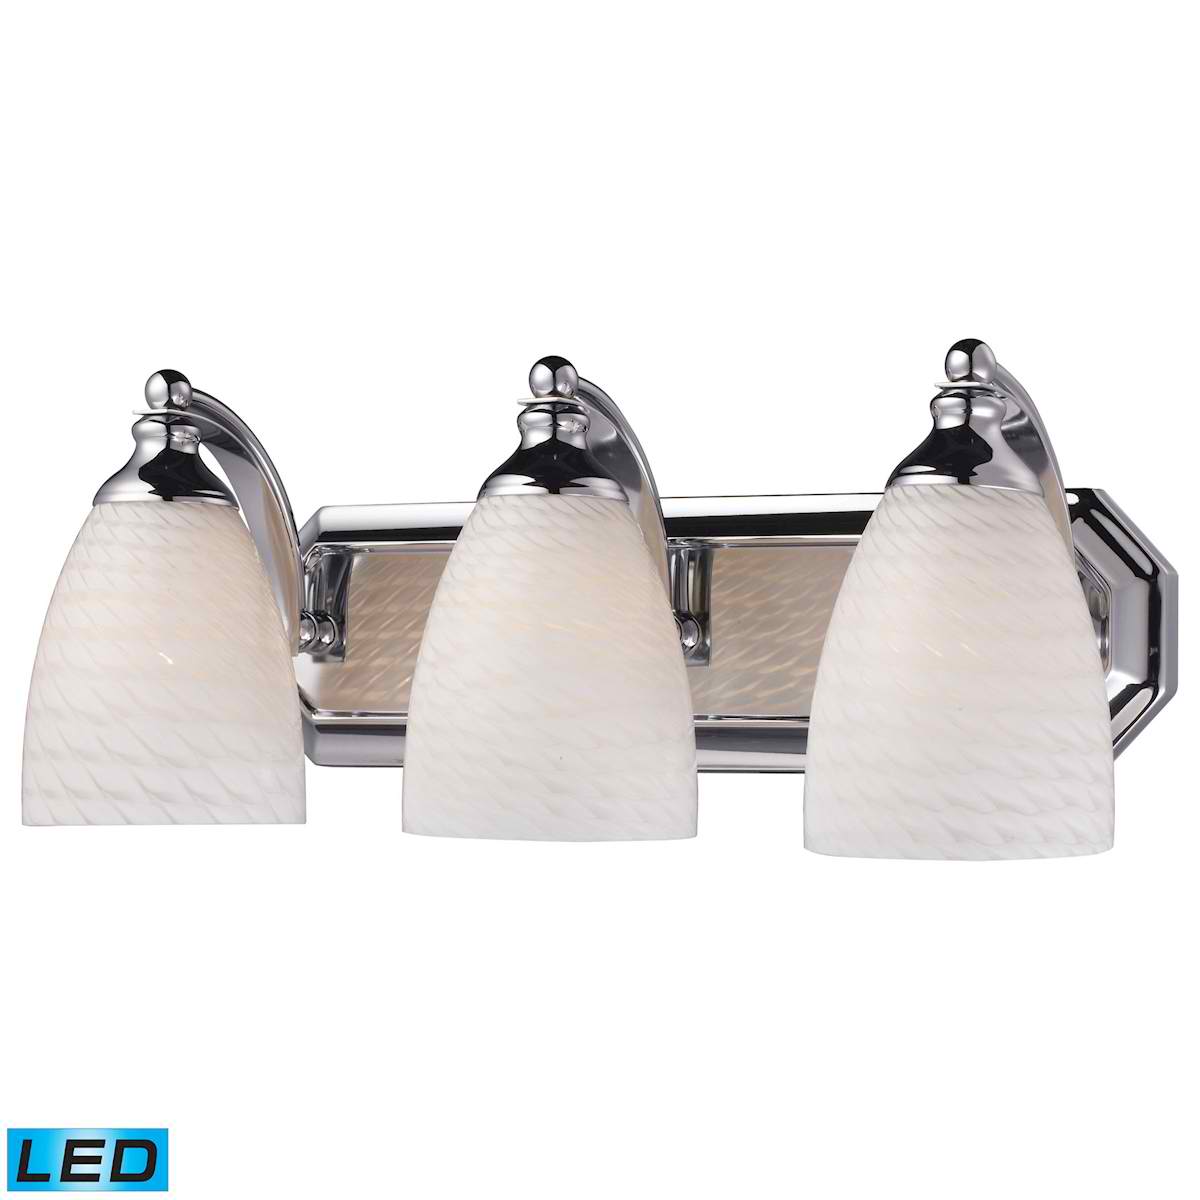 3 Light Vanity in Polished Chrome and White Swirl Glass - LED, 800 Lumens (2400 Lumens Total) with Full Scale